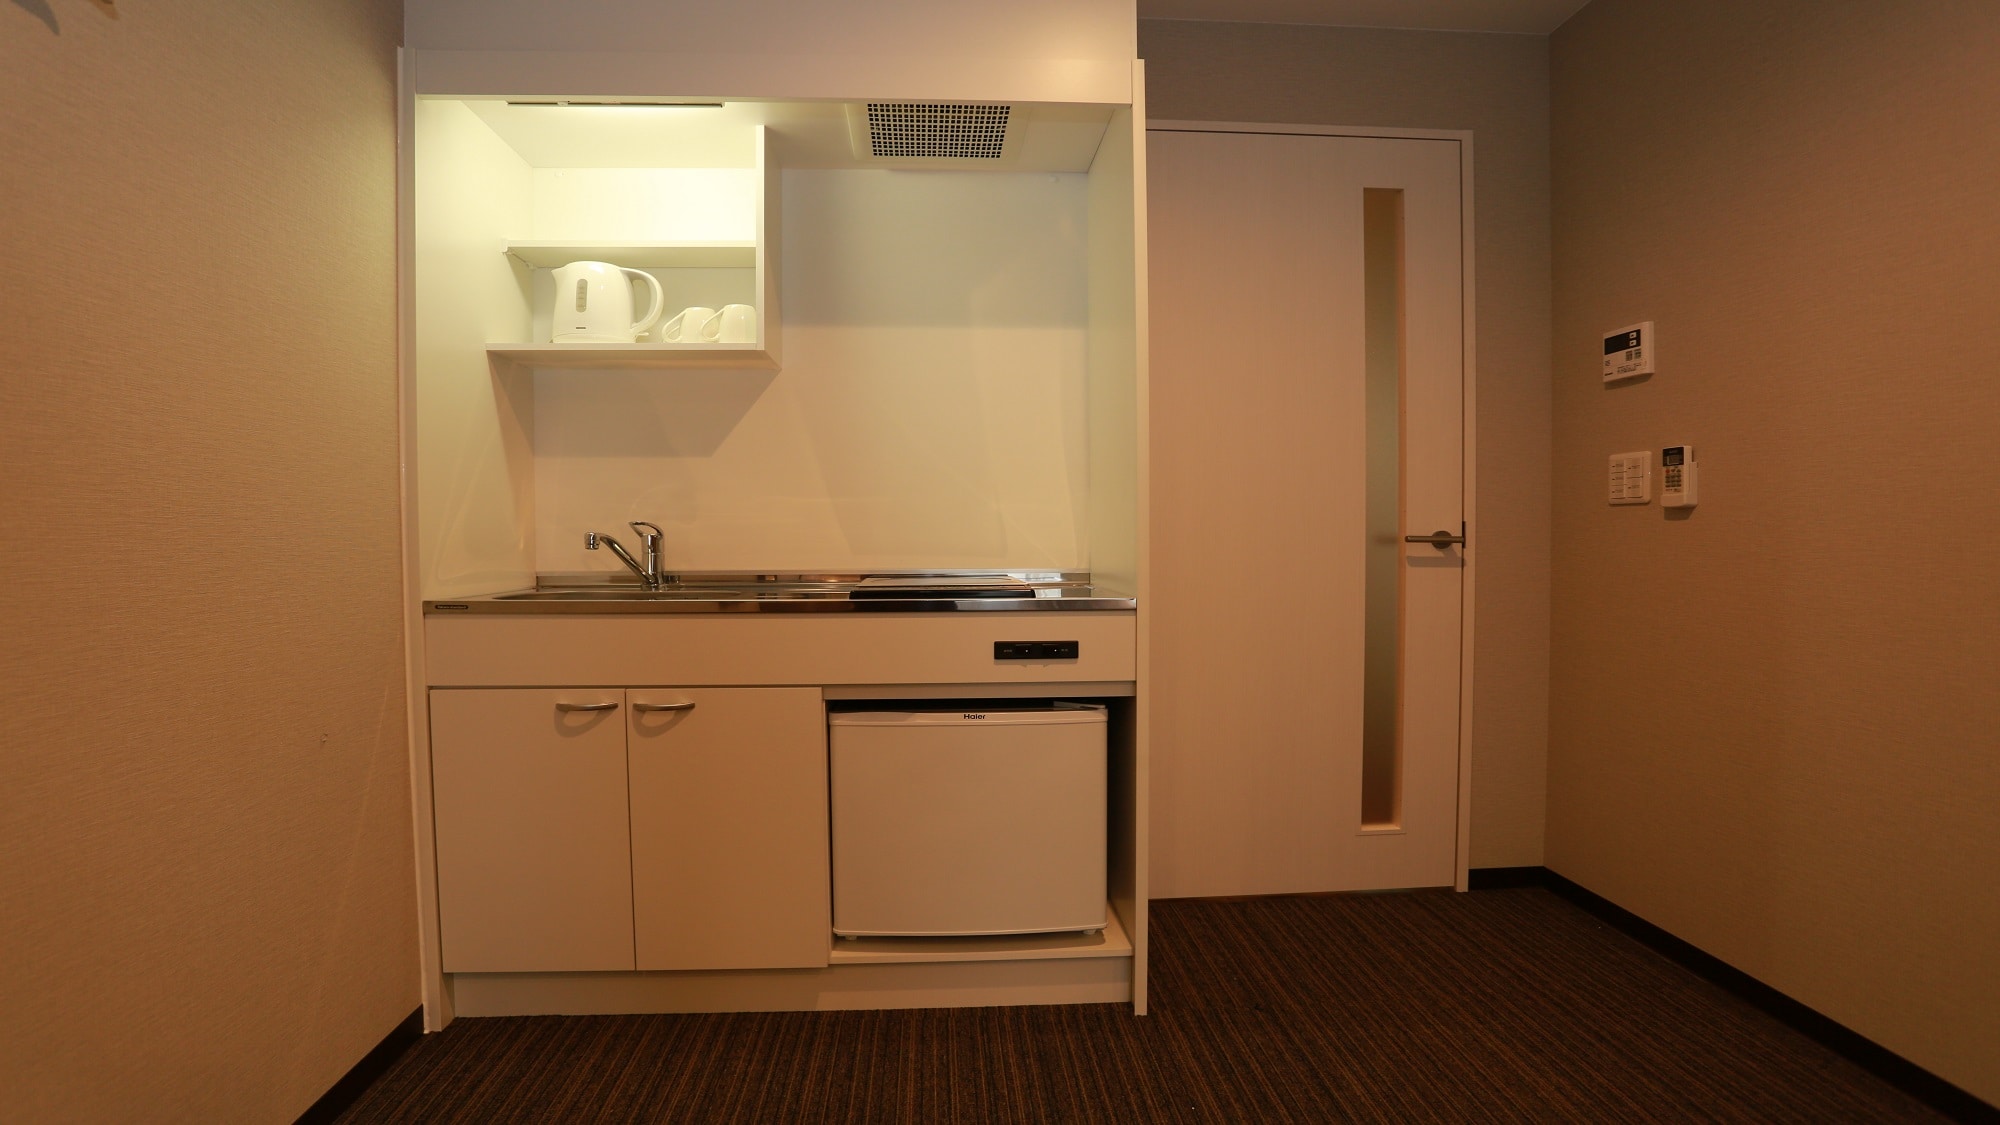 ■ All rooms are equipped with a kitchen